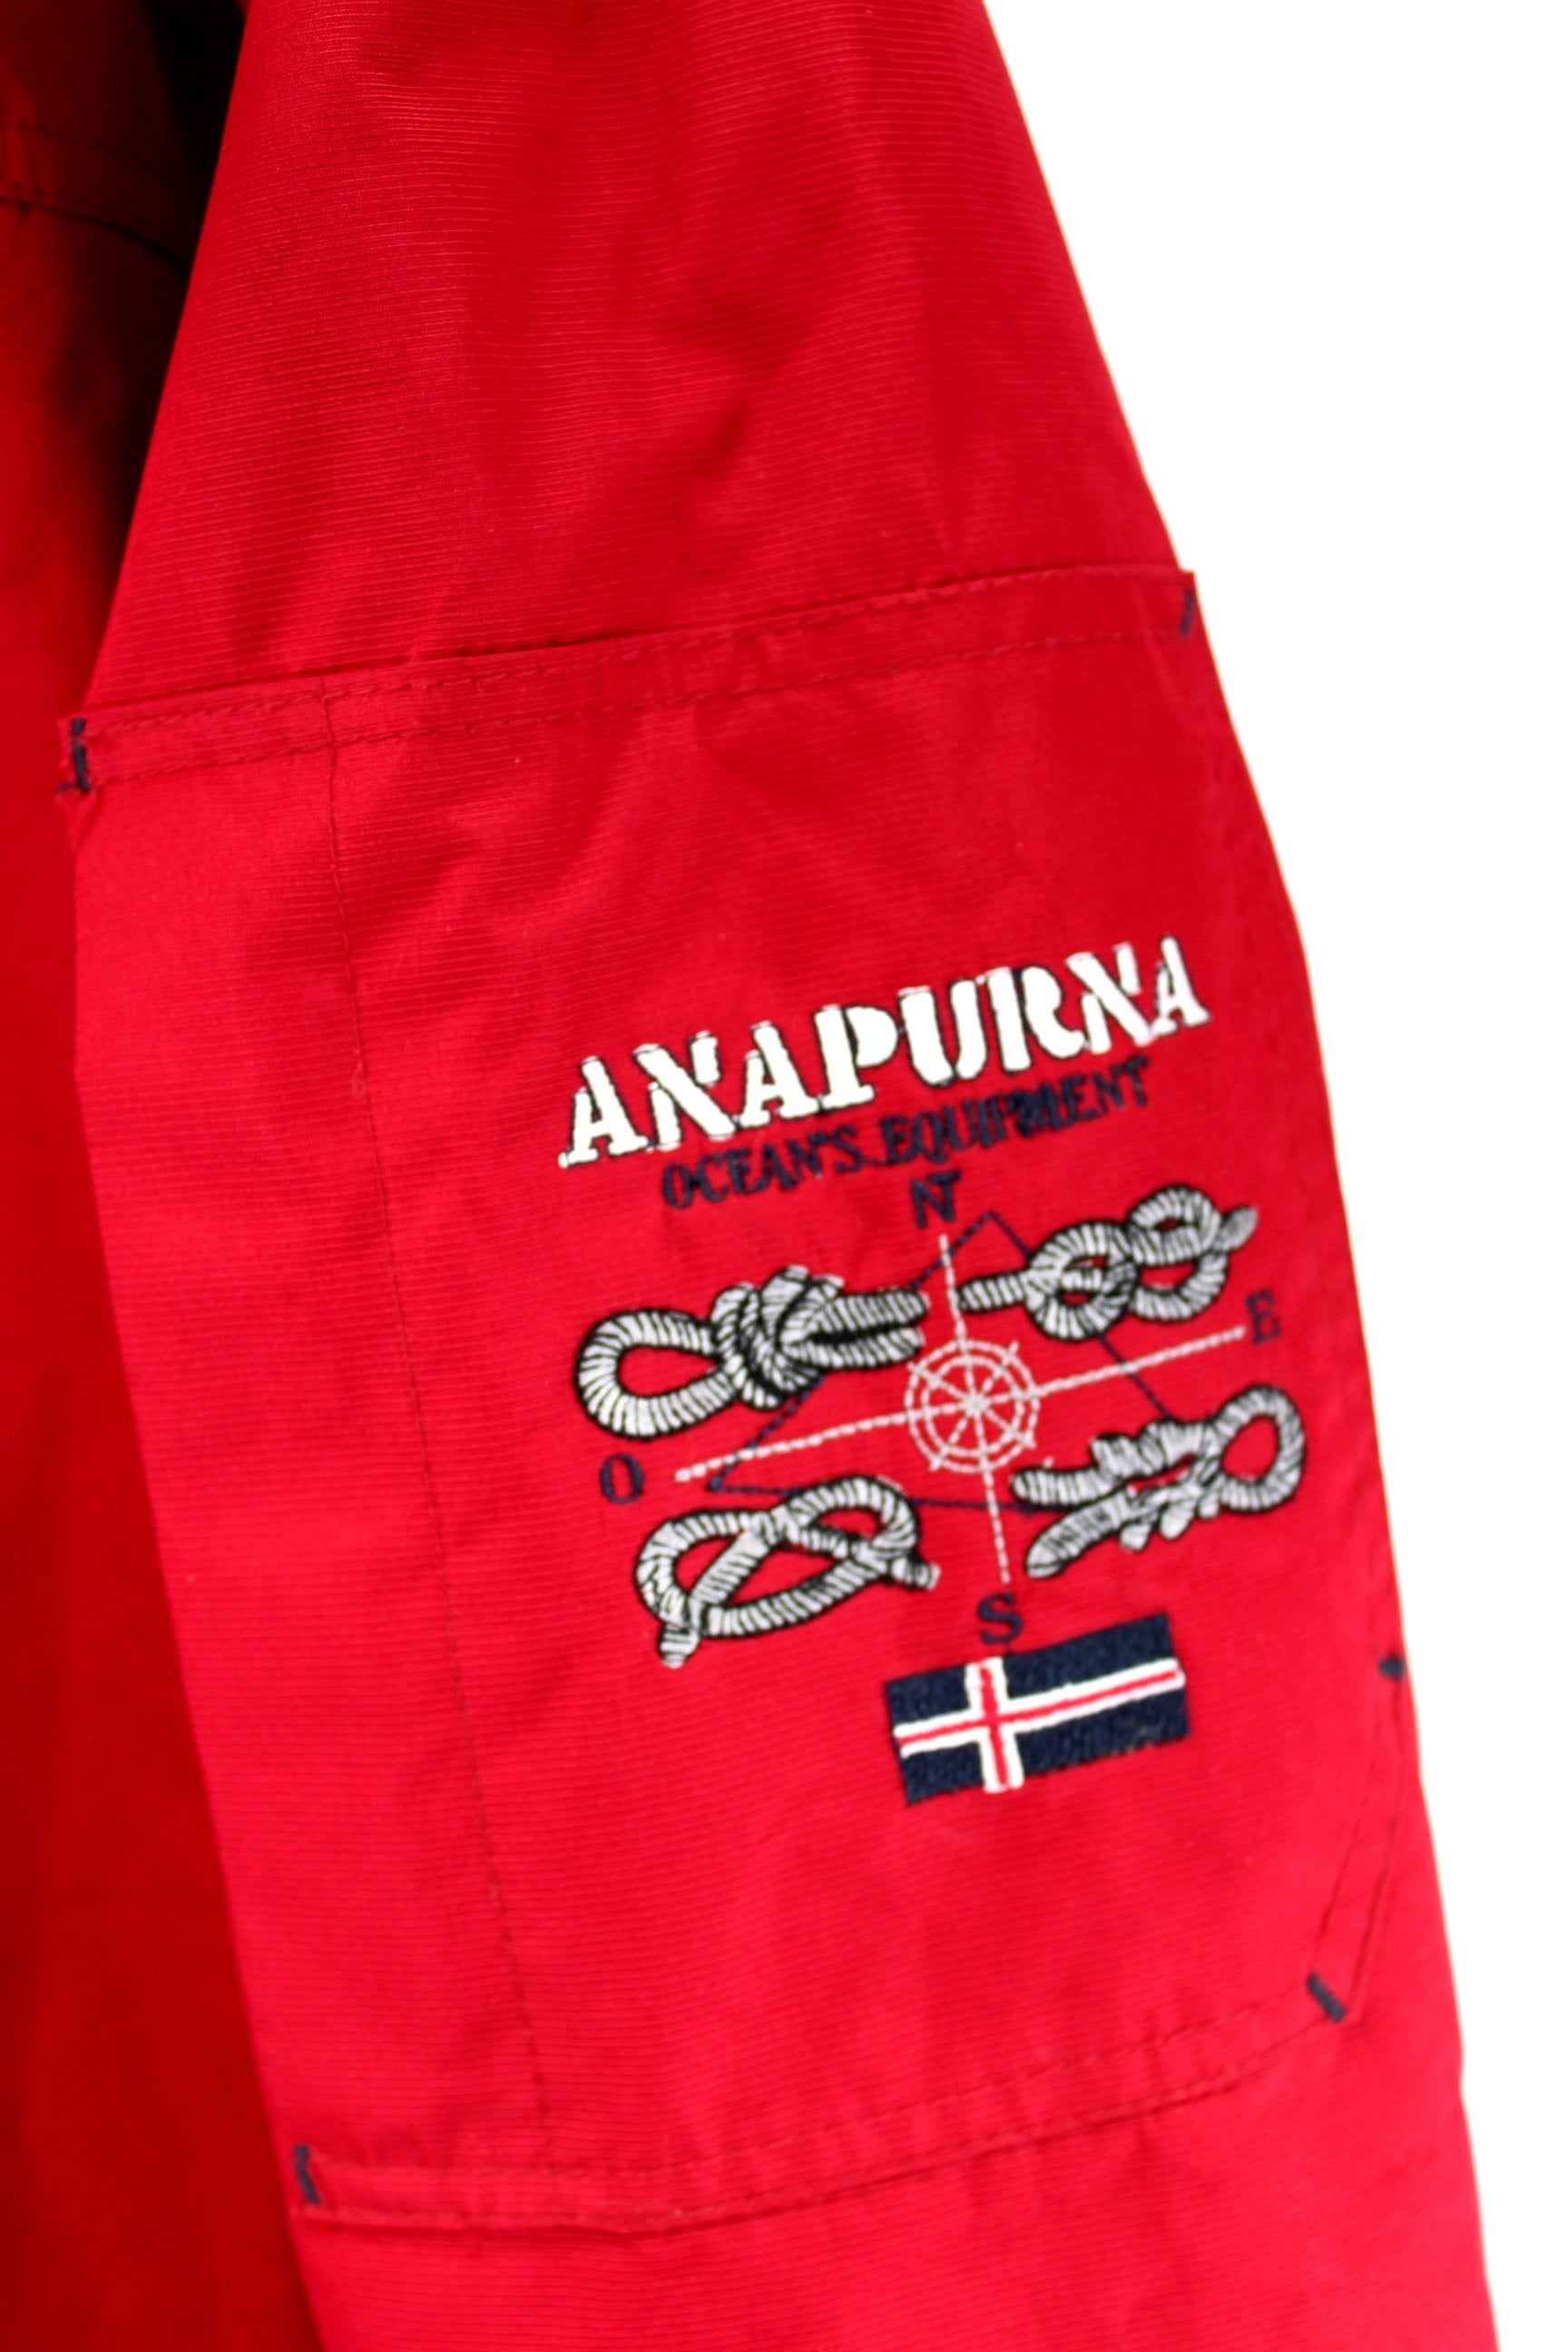 Anapurna Geographical Norway Jacket Ocean Equipment Sailing Parka Platinum Hooded lots of pockets zipped all